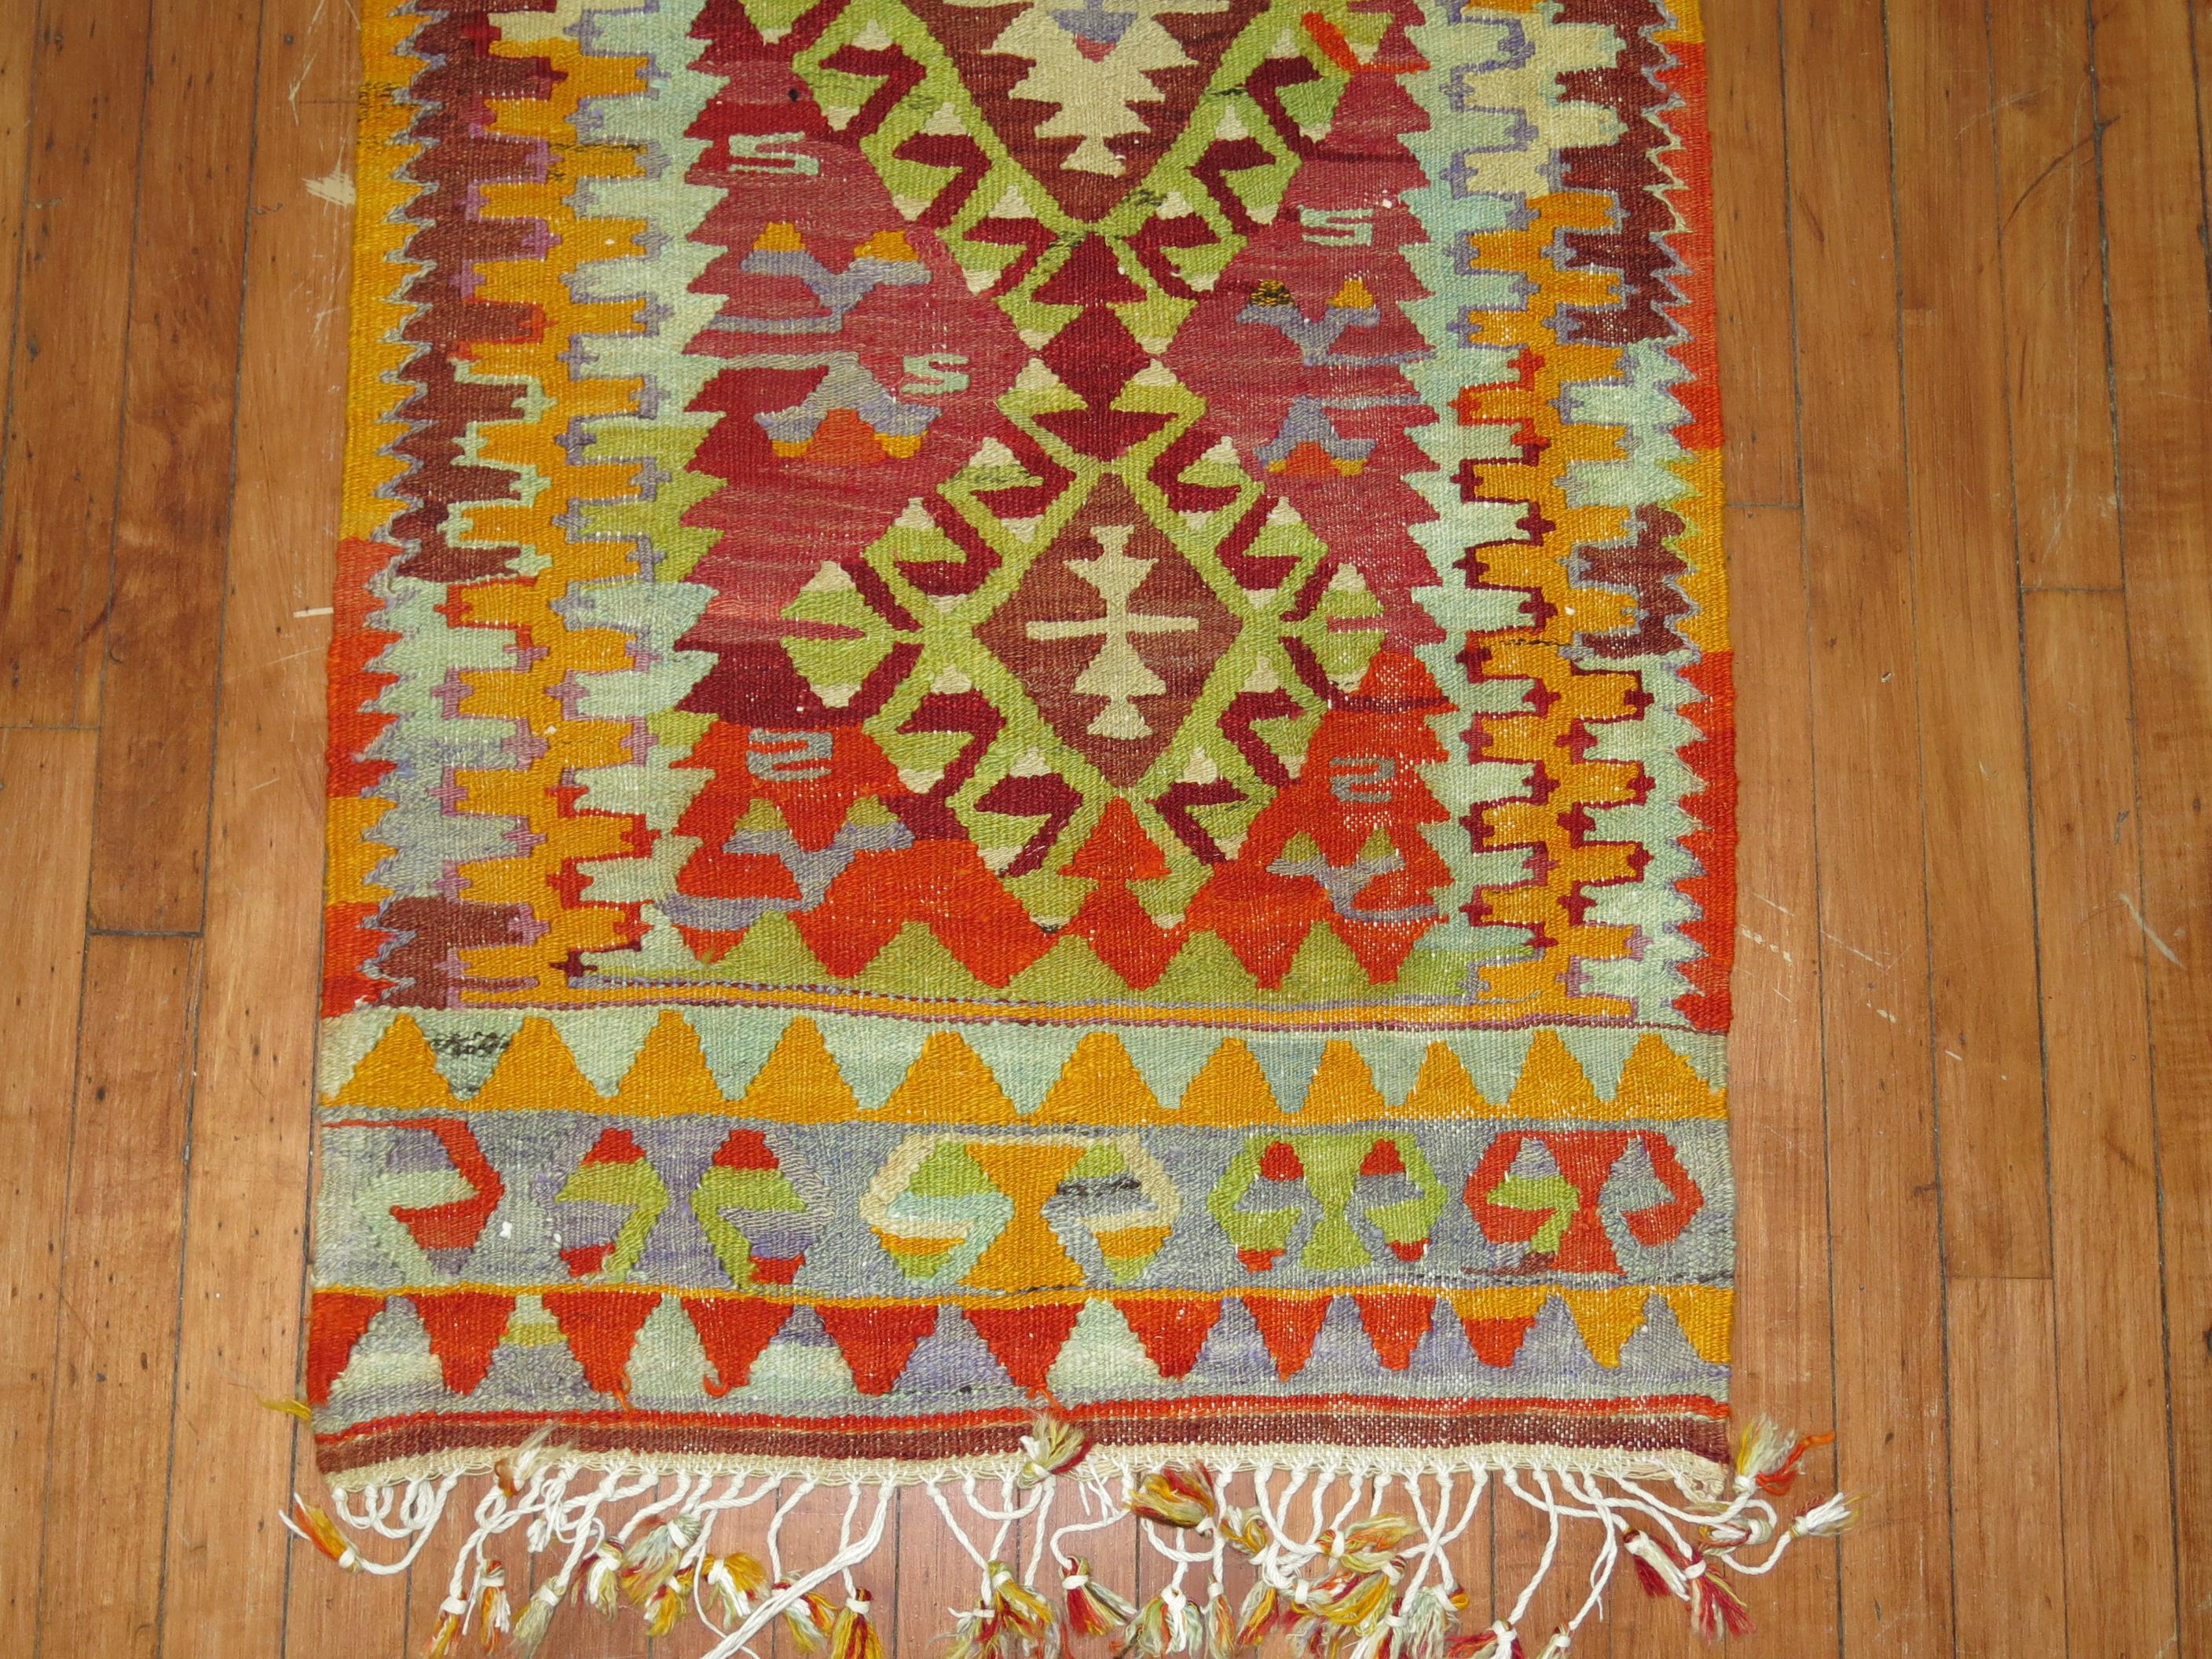 Hand-Knotted Narrow Kilim Runner in Bright Red and Green